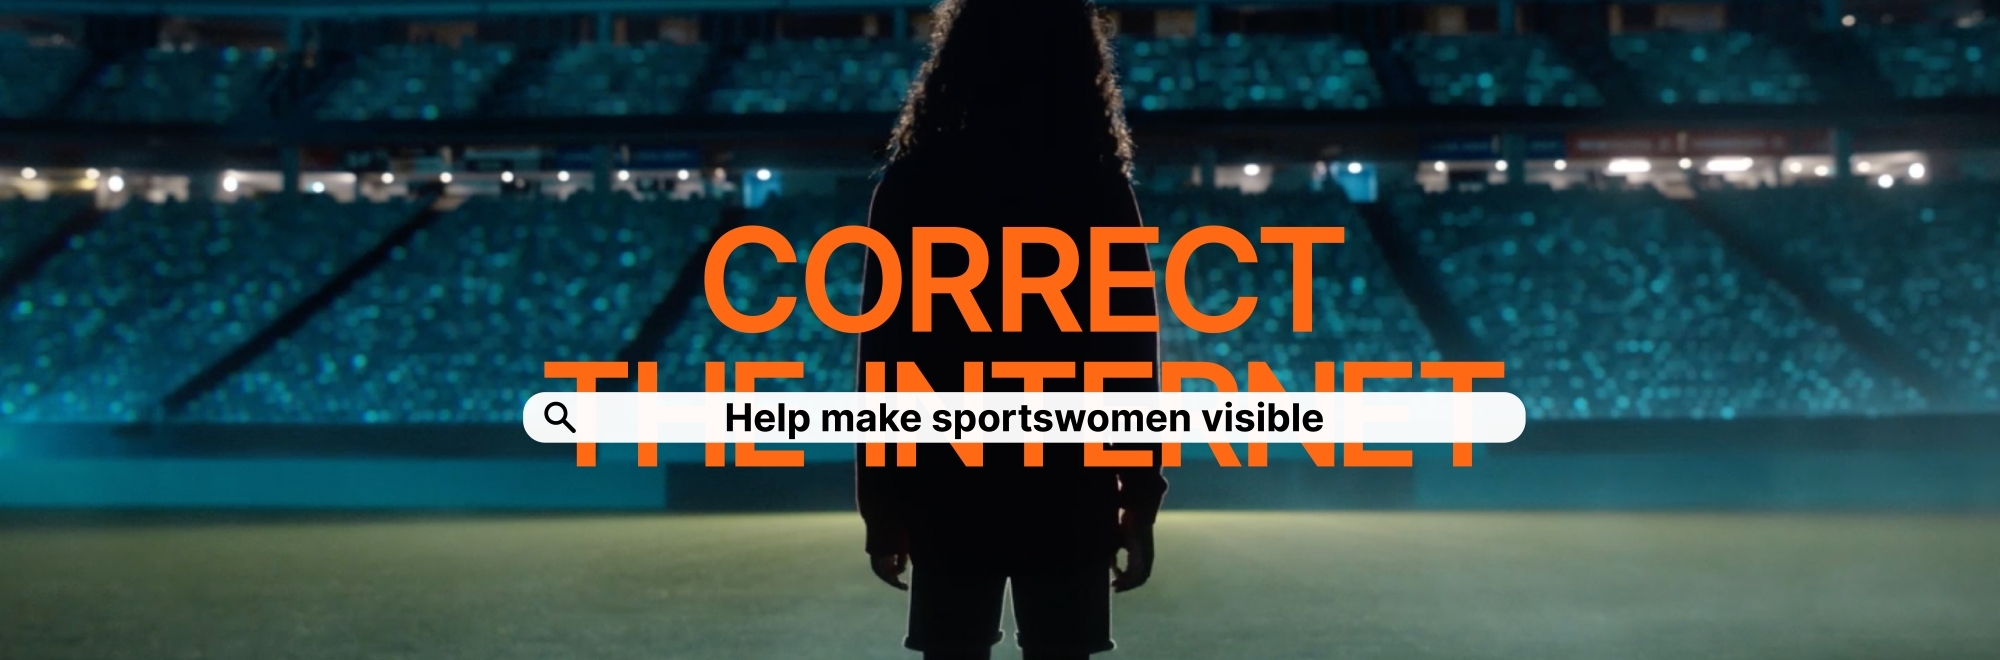 Global campaign 'Correct The Internet’ wants to make sportswomen more visible